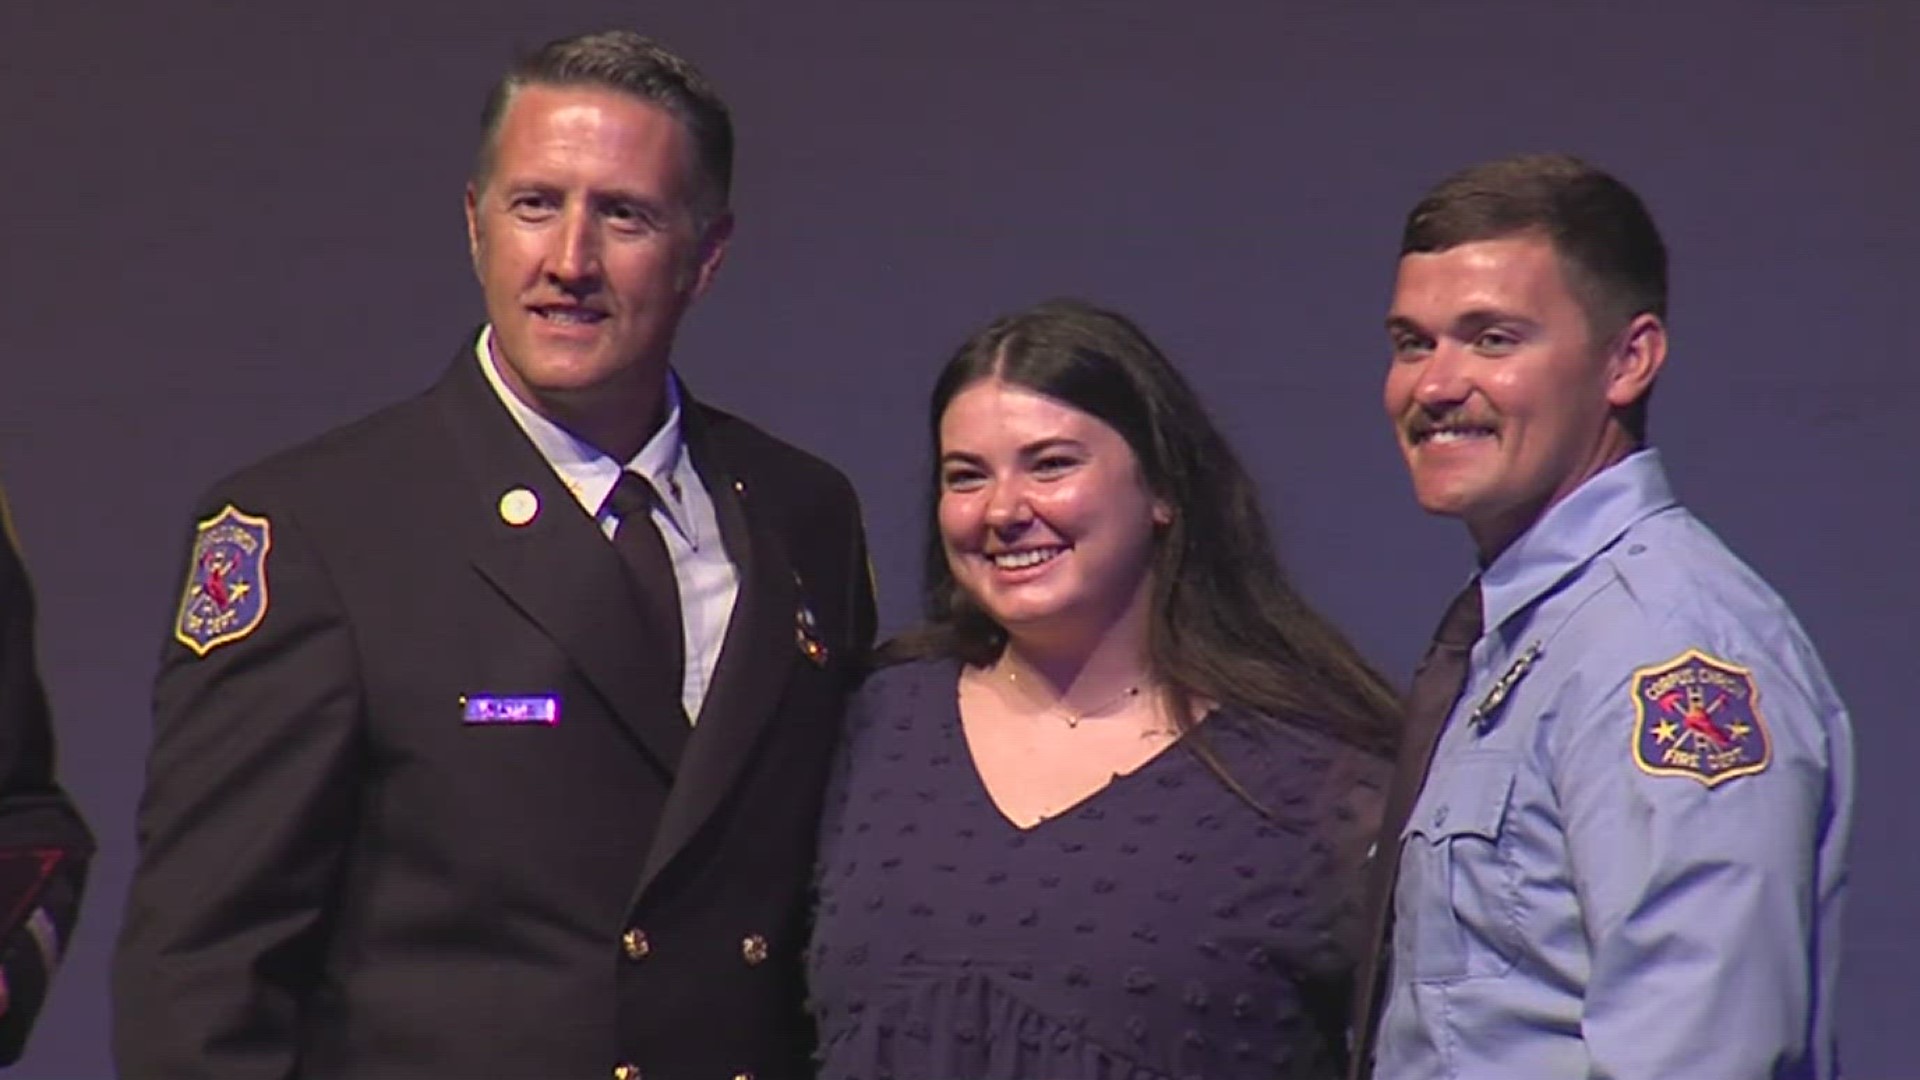 3NEWS spoke with firefighter graduate Zachary Martin, who said he cant wait to give back to his community.